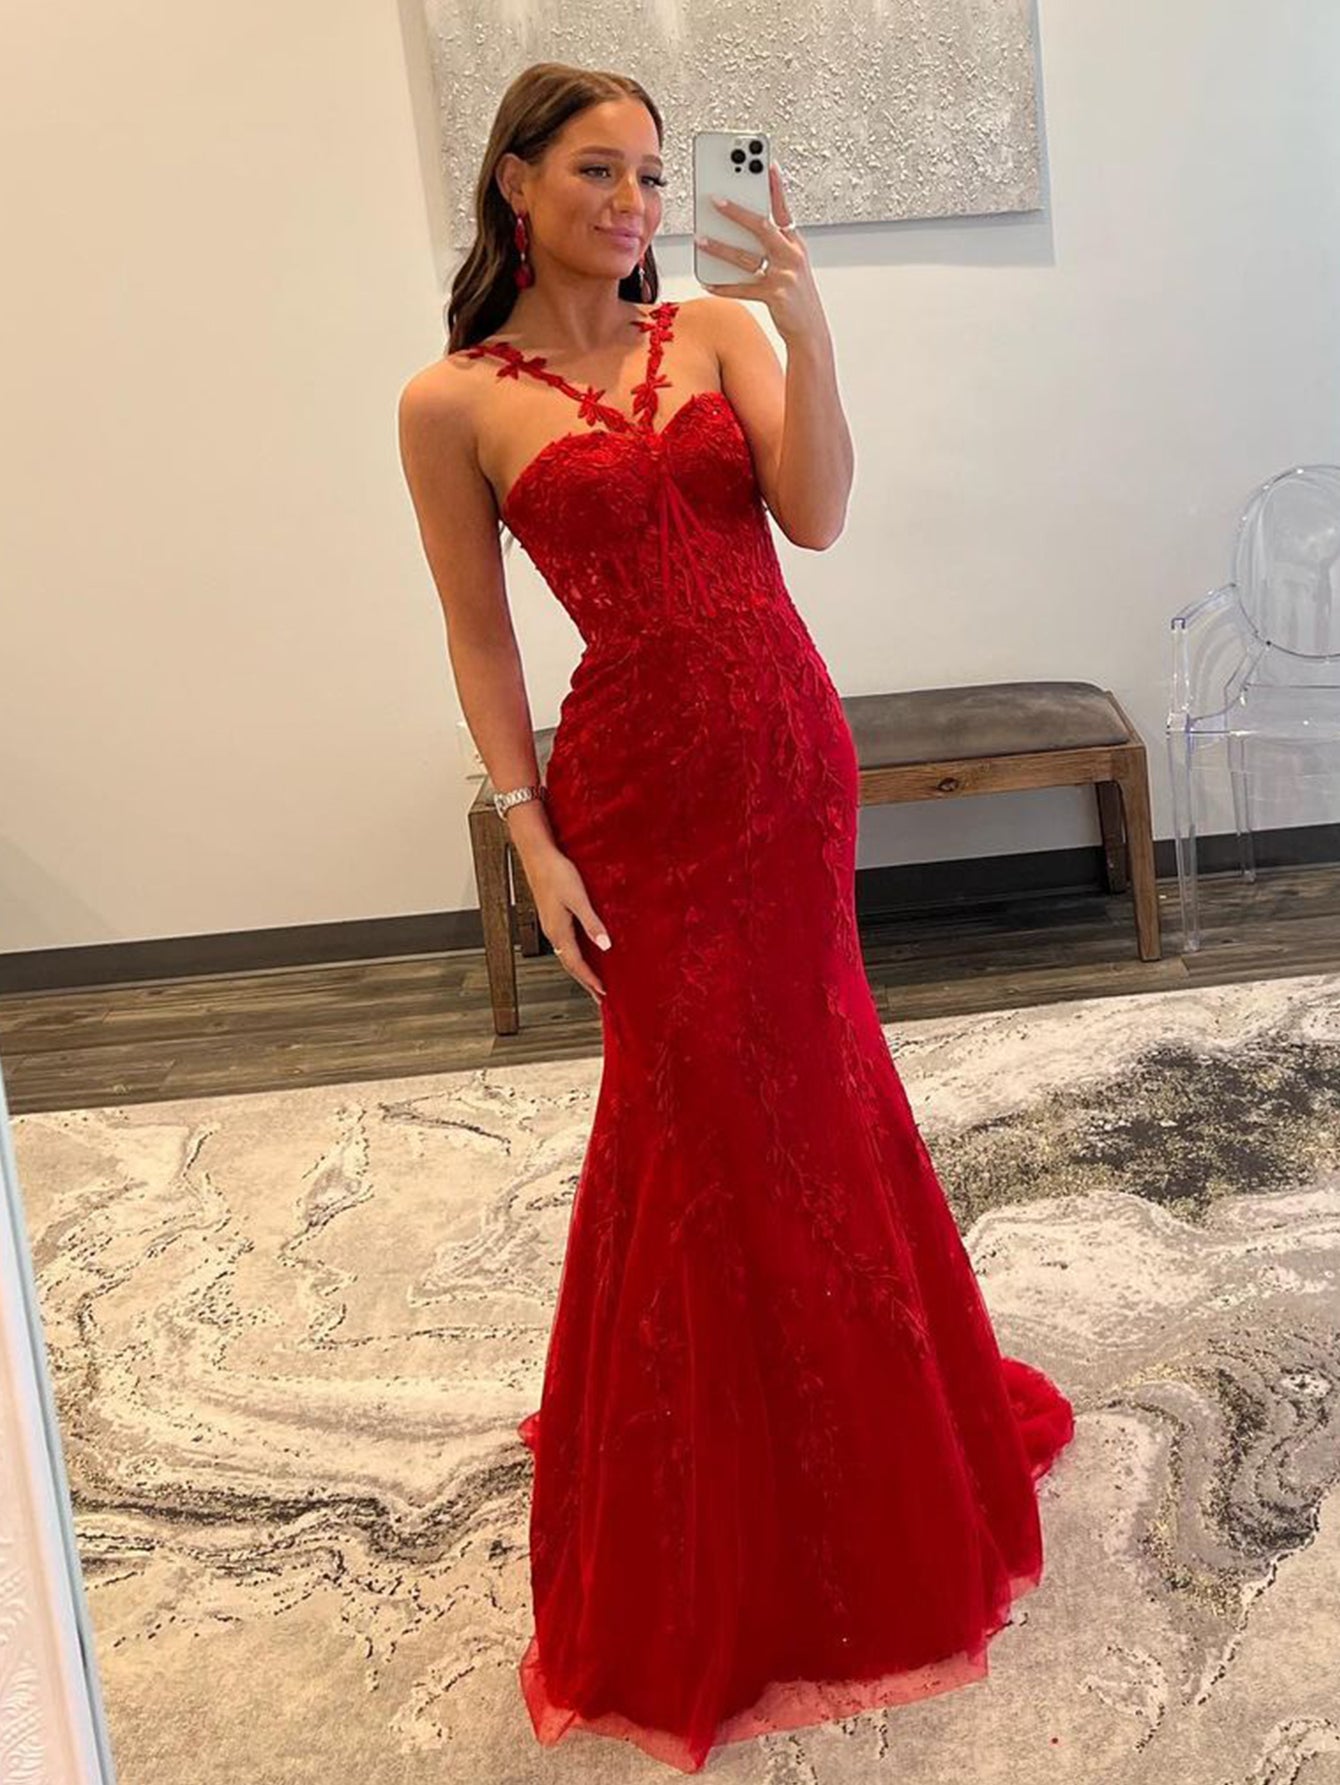 V Neck Mermaid Red Lace Short Prom Dresses, Mermaid Red Homecoming